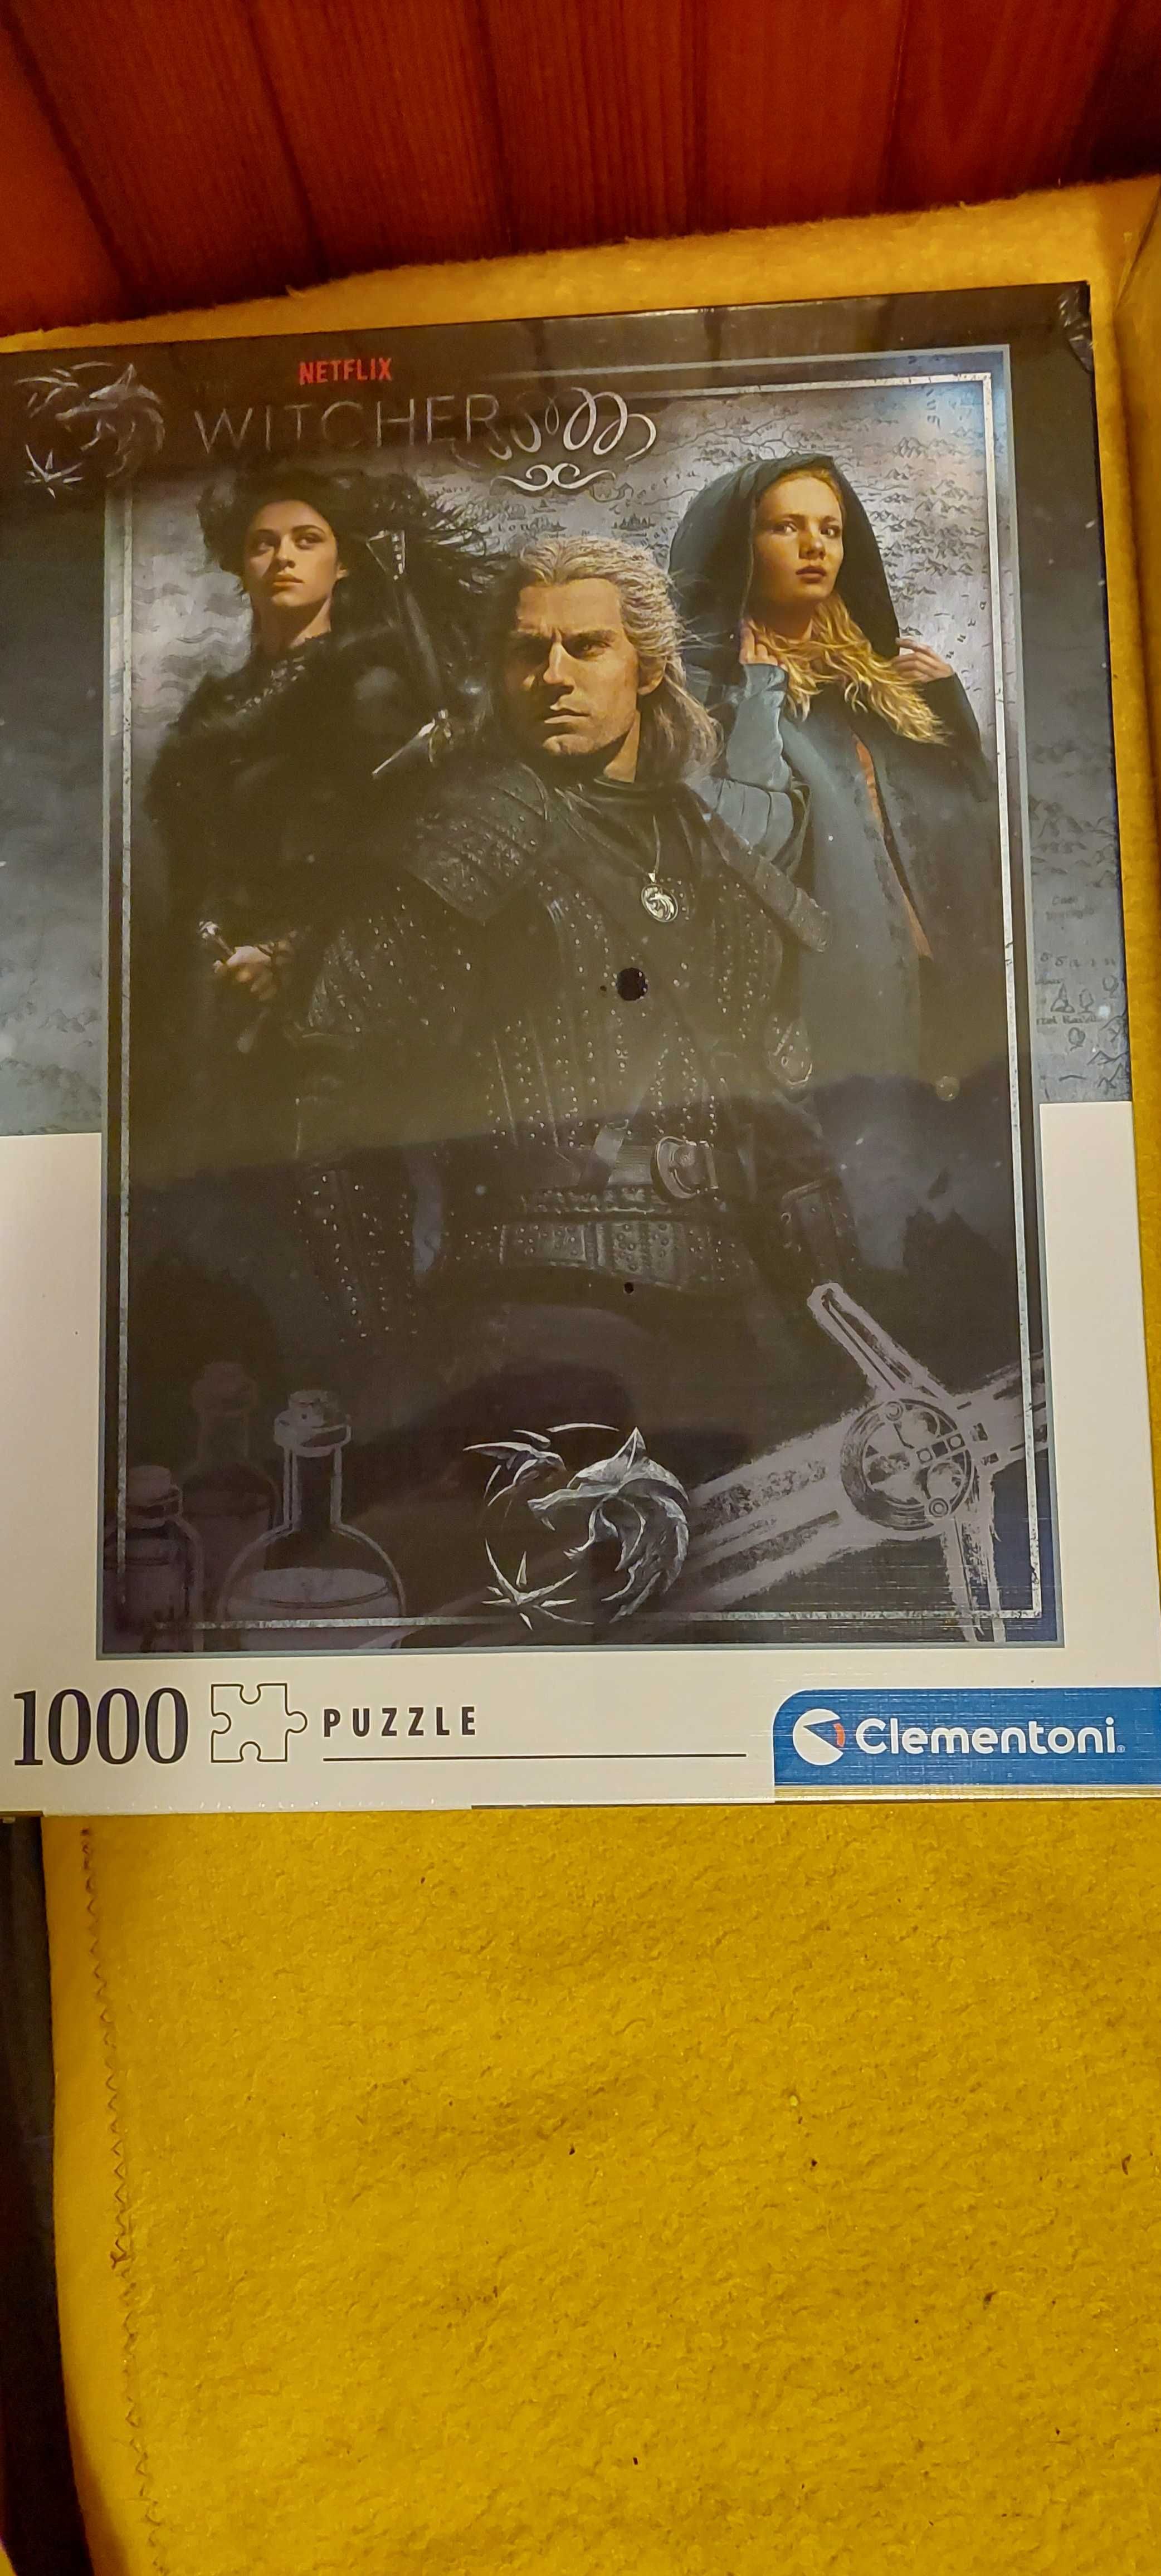 clementoni 1000 puzzle the witcher